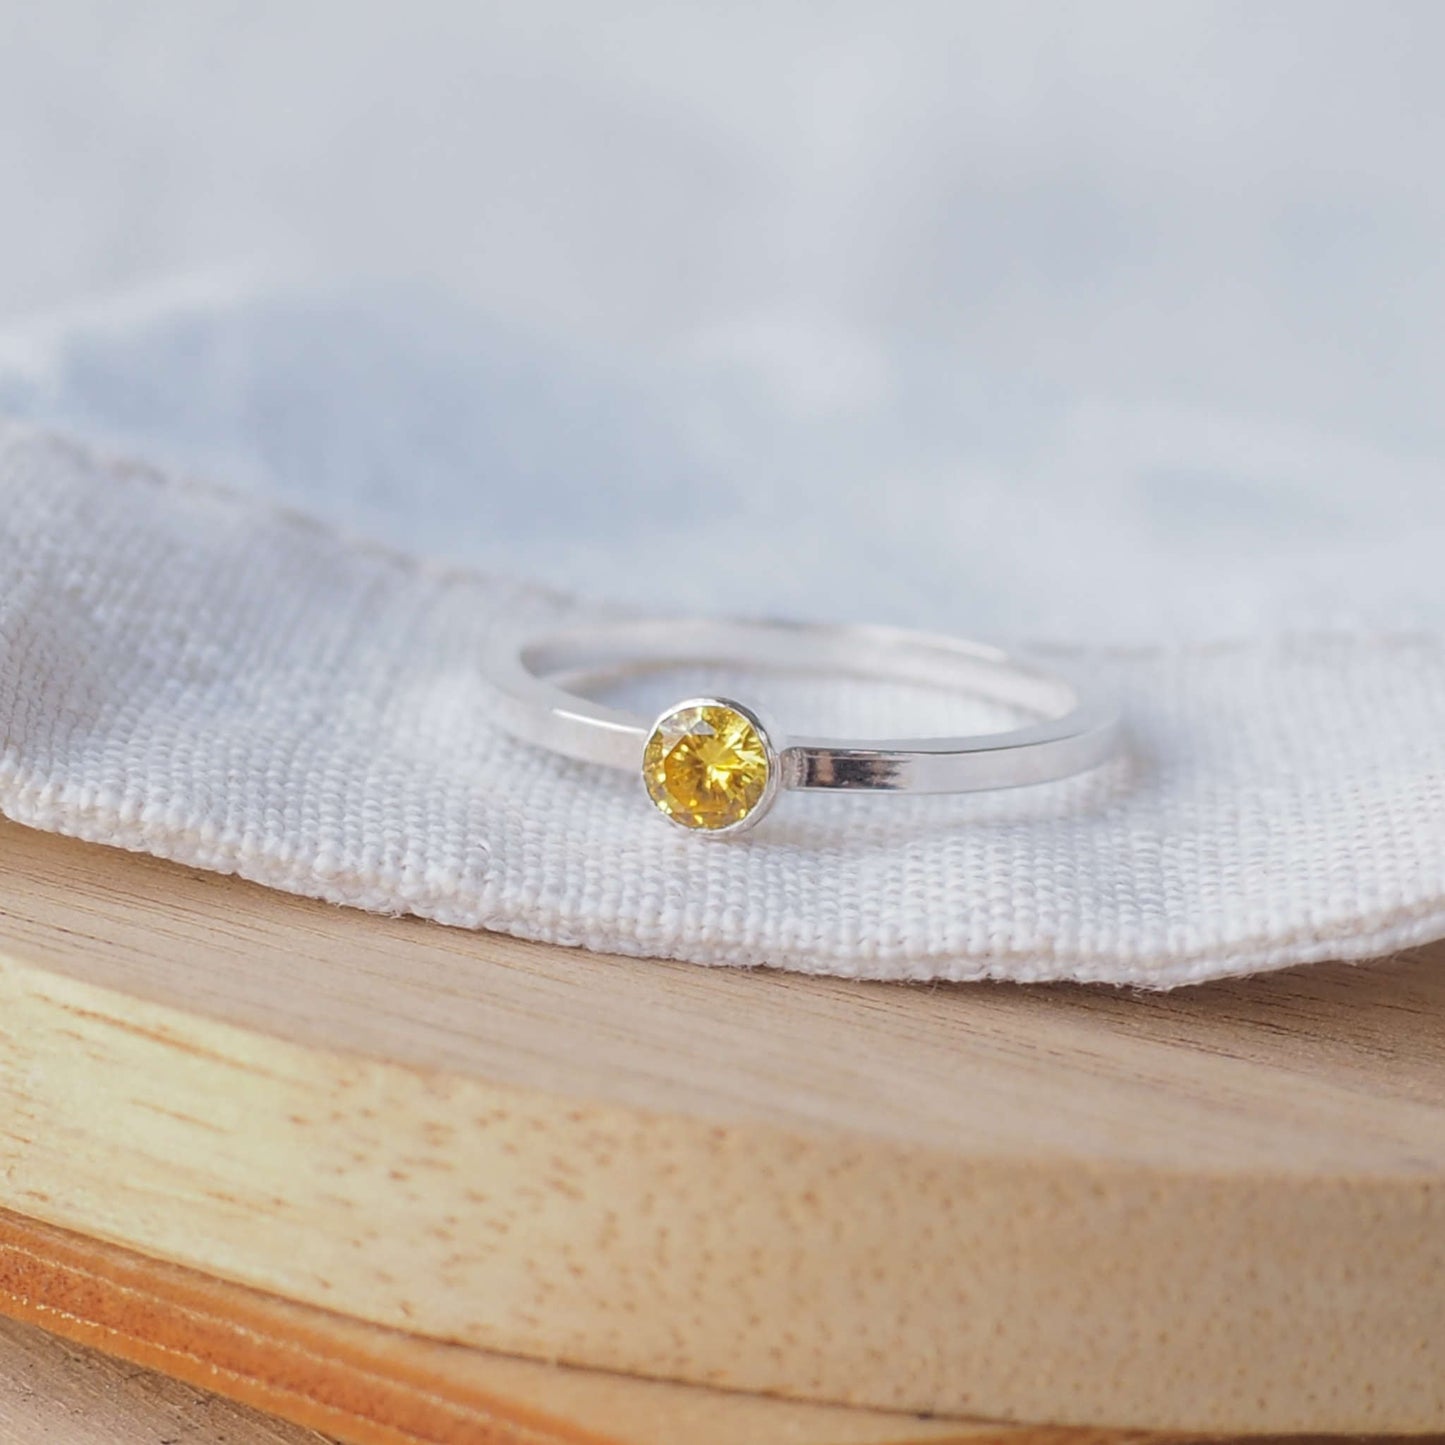 Sparkly yellow gemstone ring on white metal. Sterling Silver and Cubic zirconia ring made in a simple solitaire style with a 4mm round gemstone modern set in a fully enclosed surround. Handmade in Scotland by maram jewellery